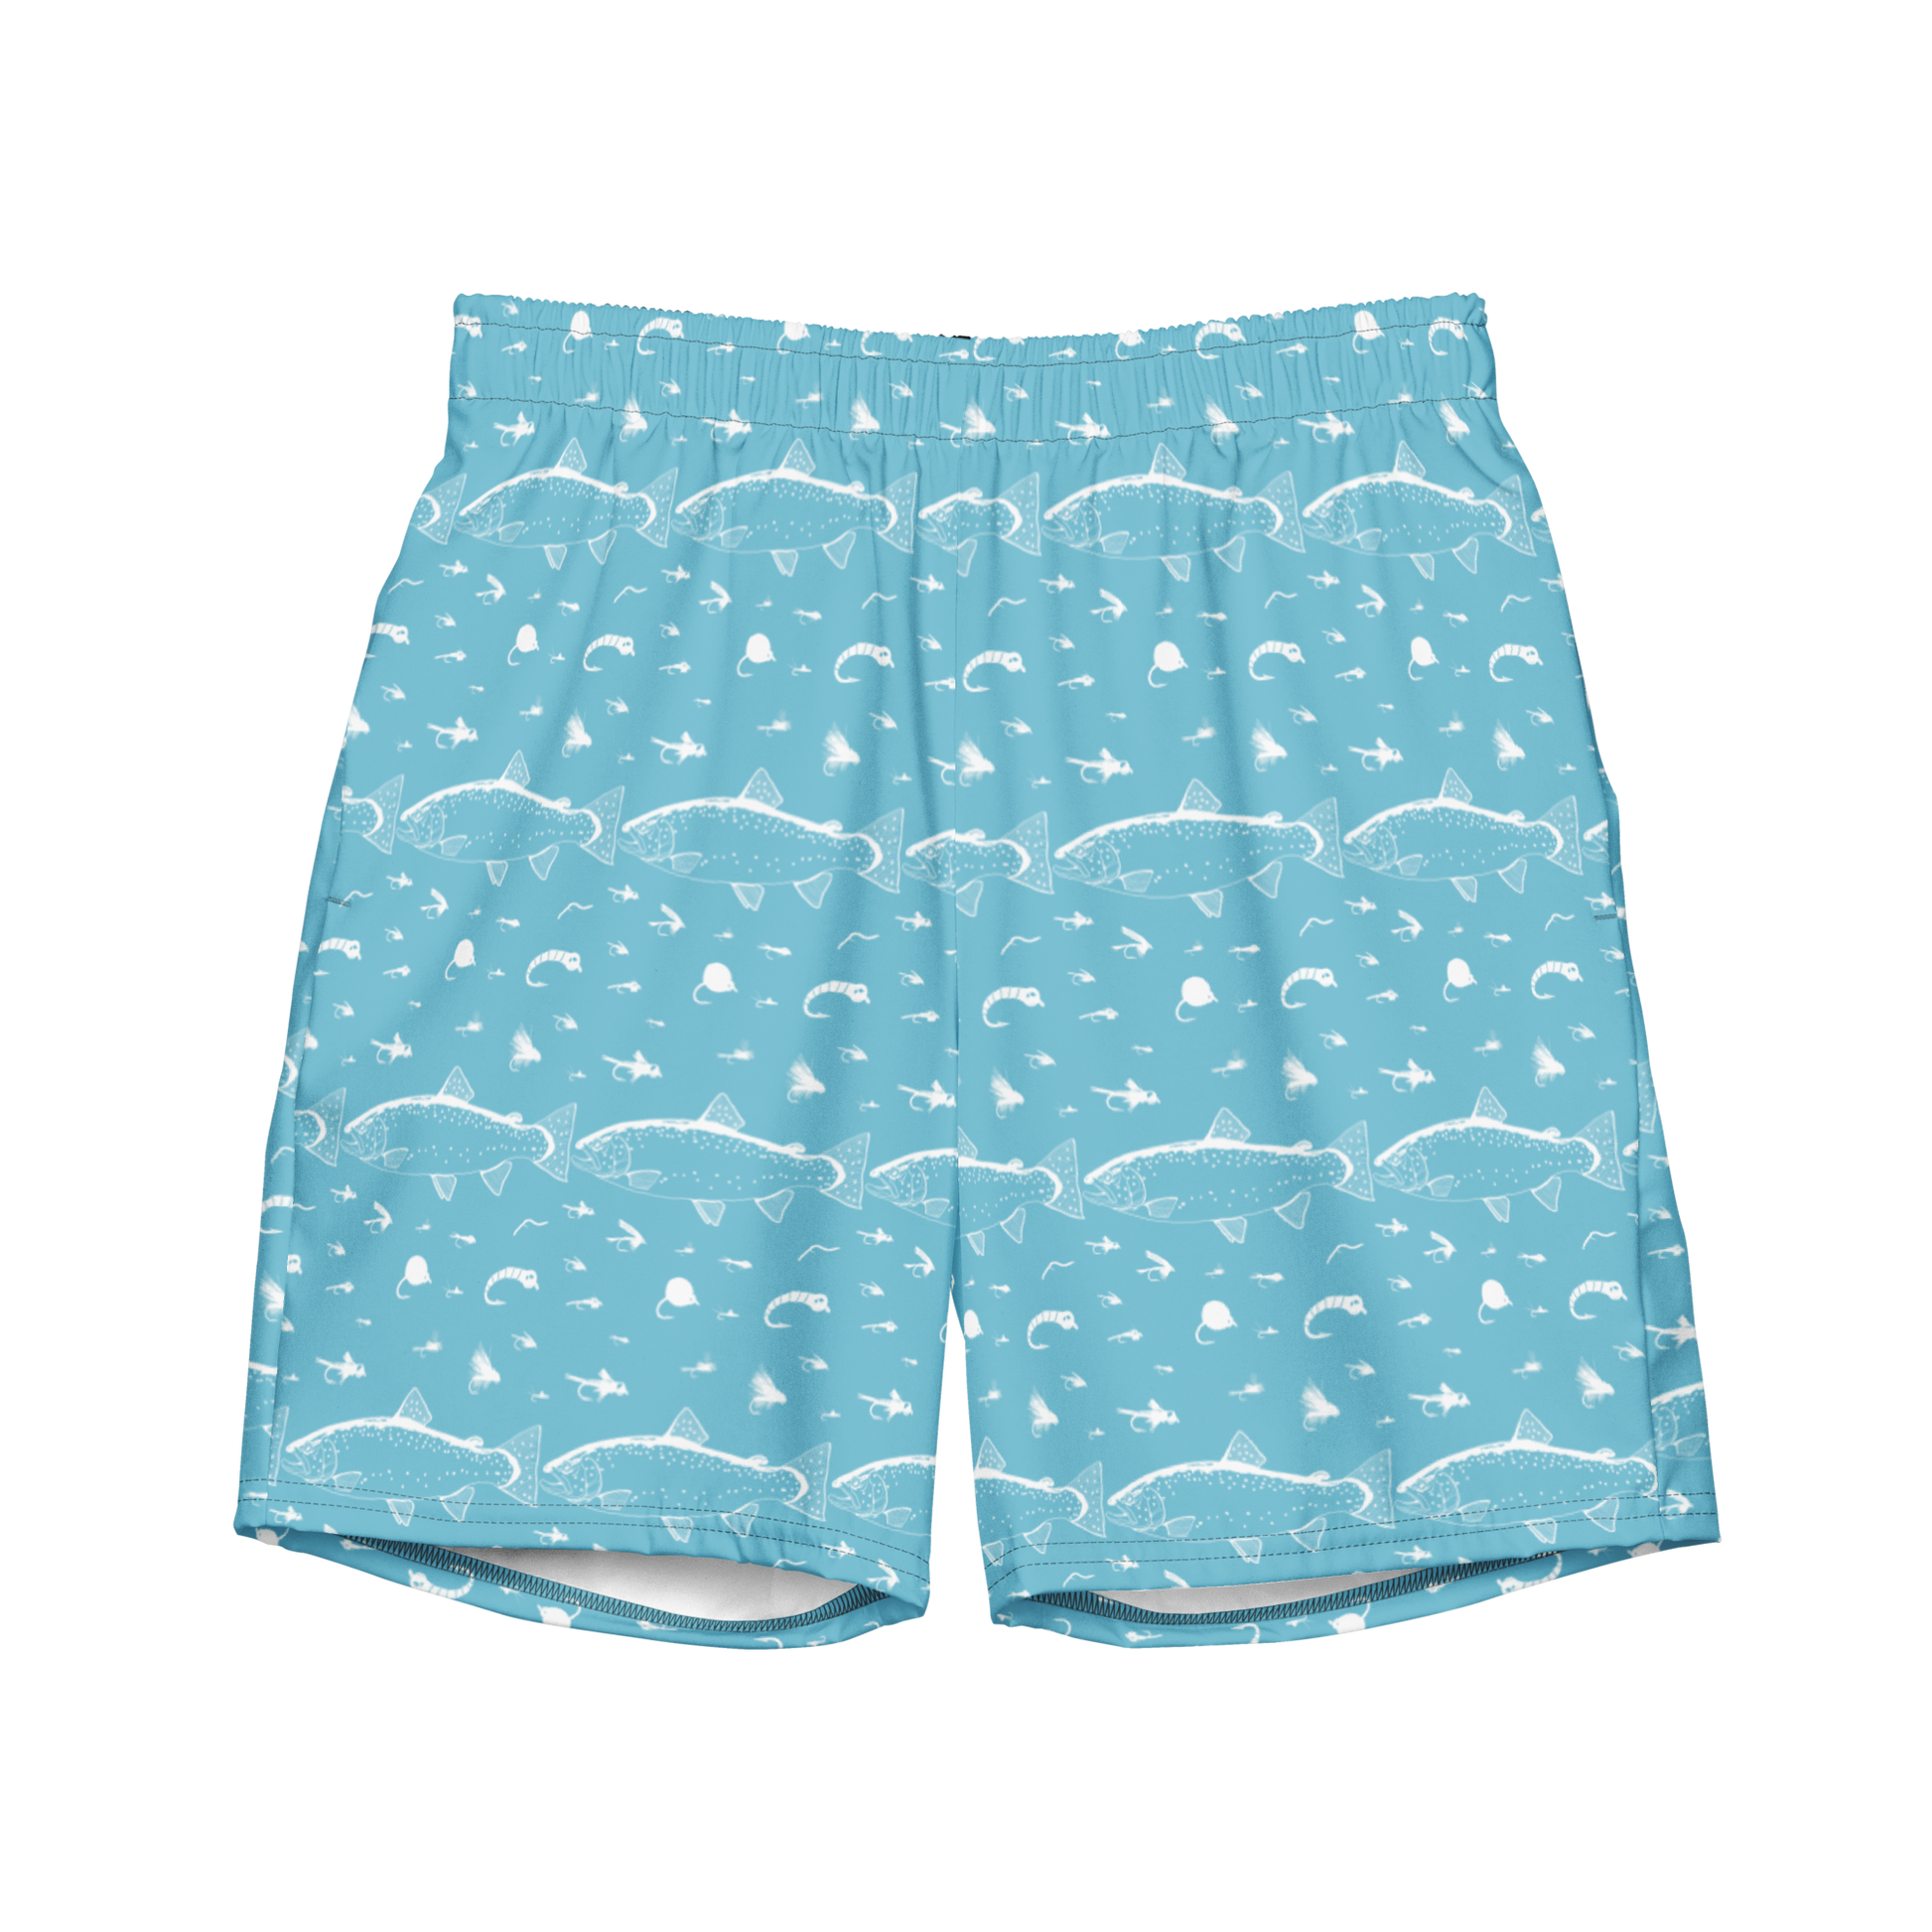 Blue fly fishing shorts / swim trunks. They have a pattern with trout and flies. Front side 